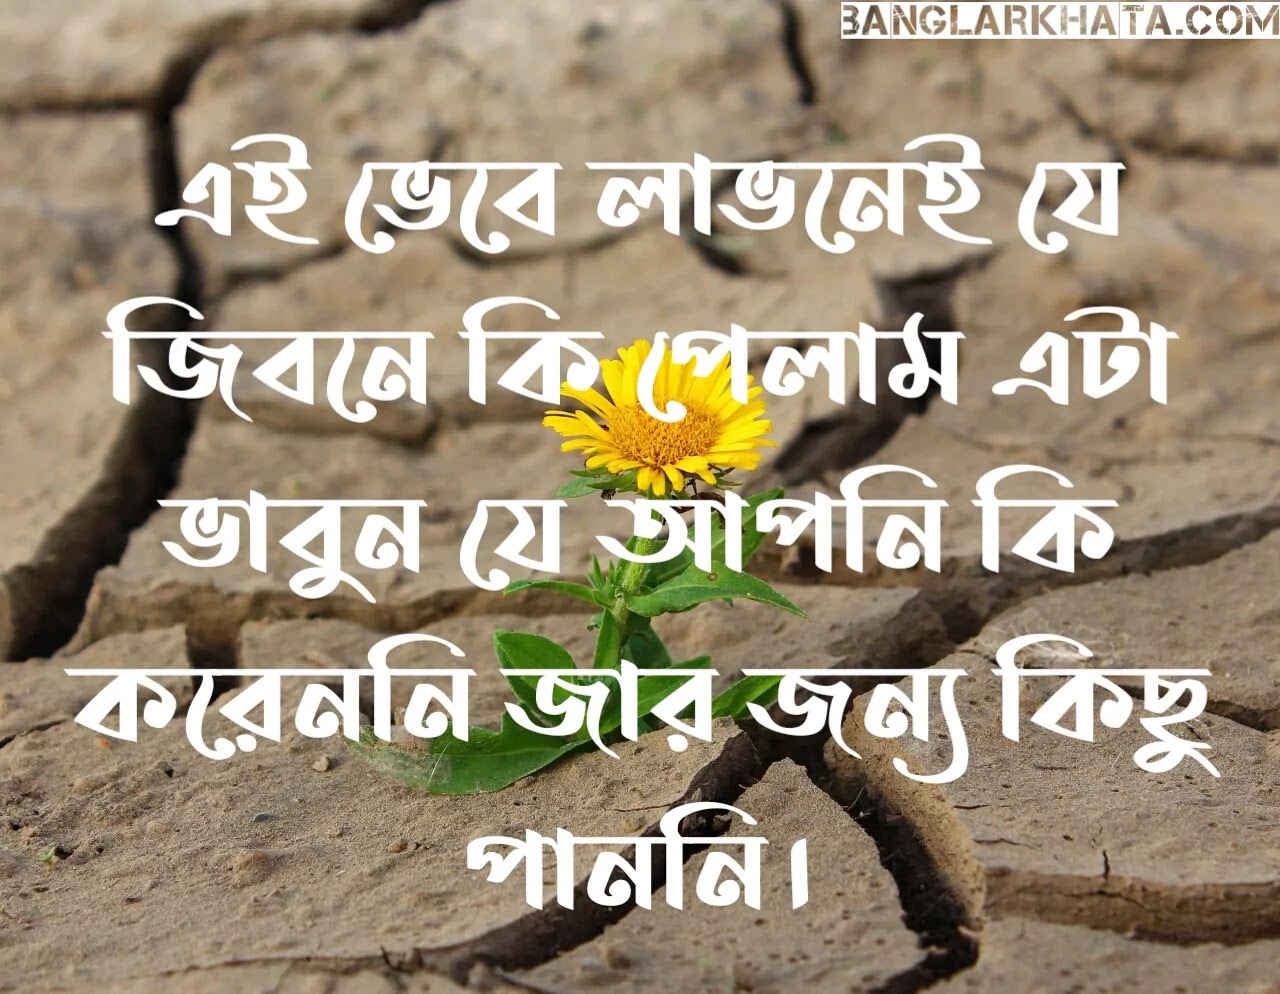 Bengali Quotes about life